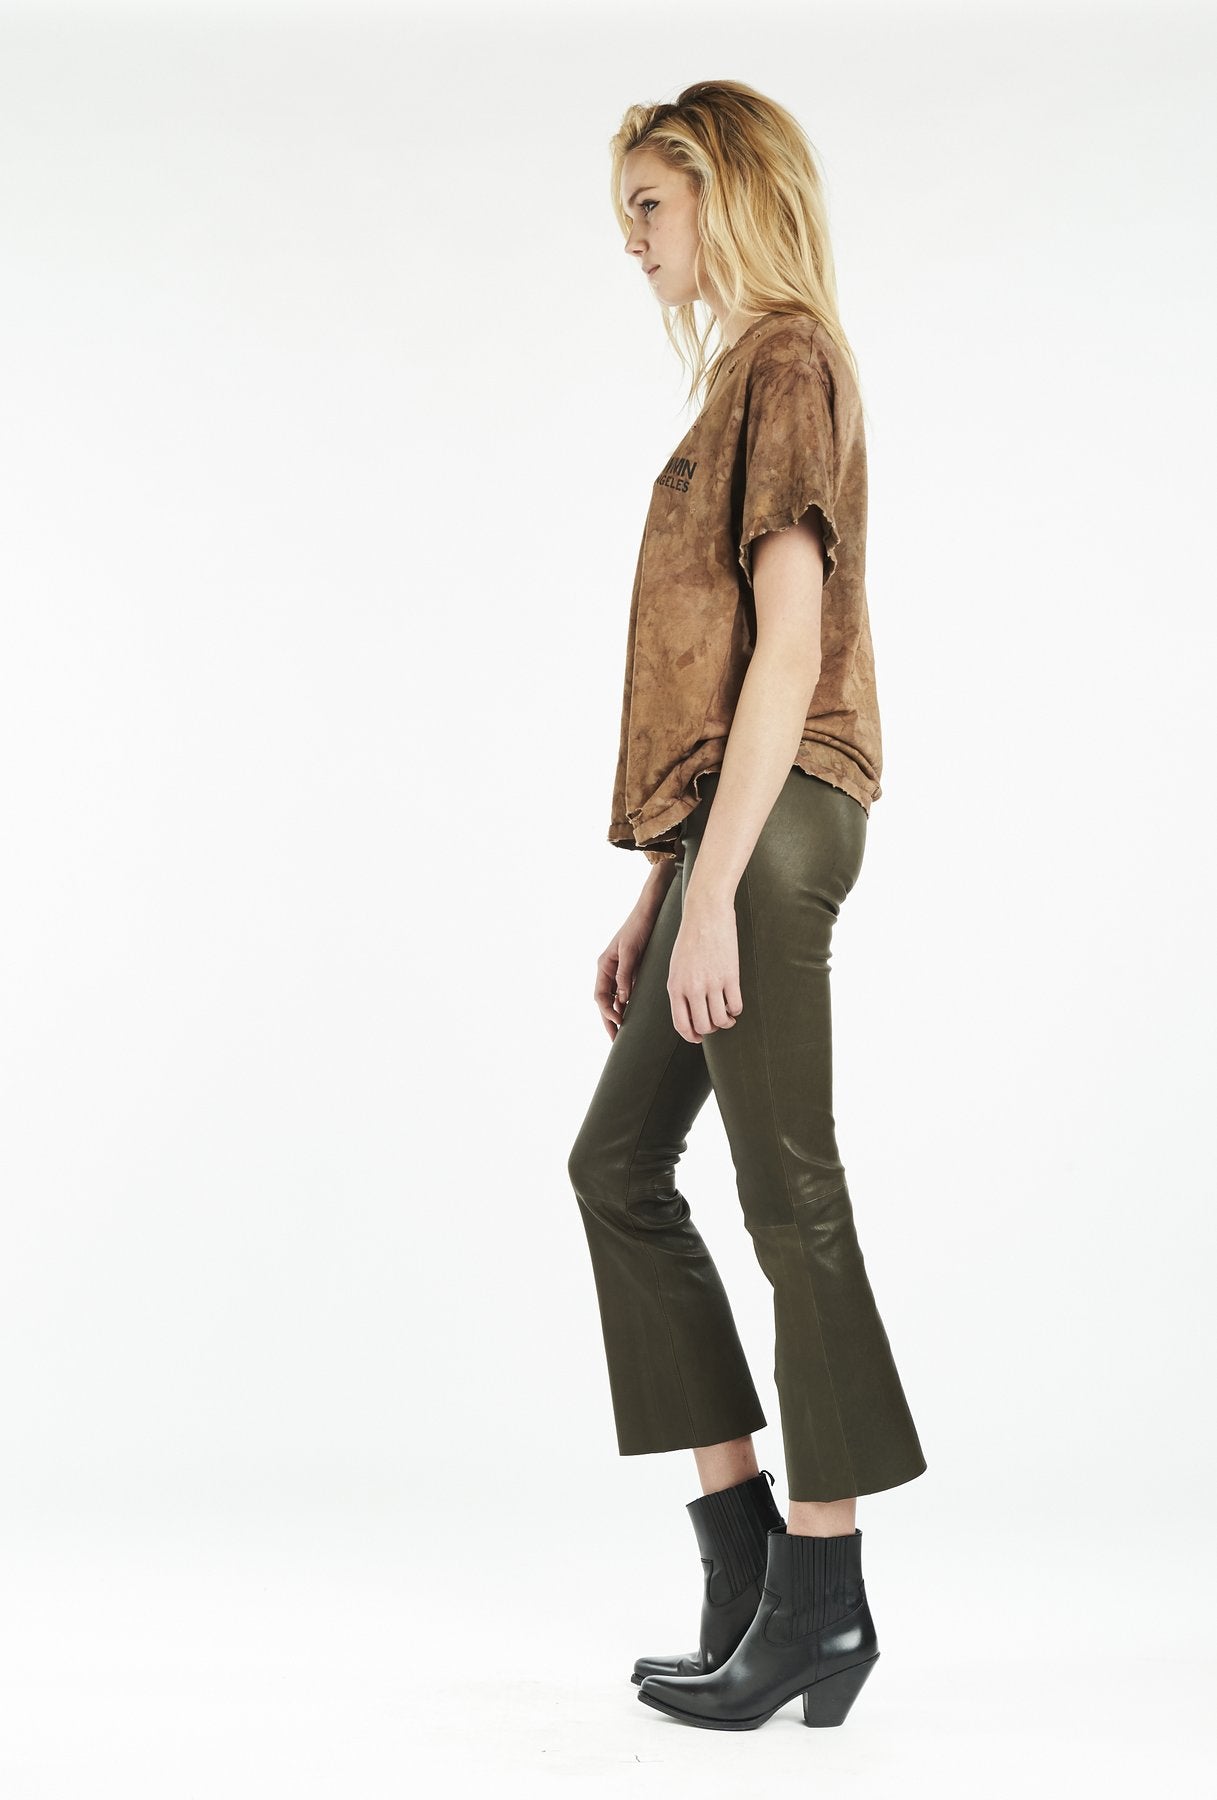 Sprwmn Cropped Flare Leggings in Army